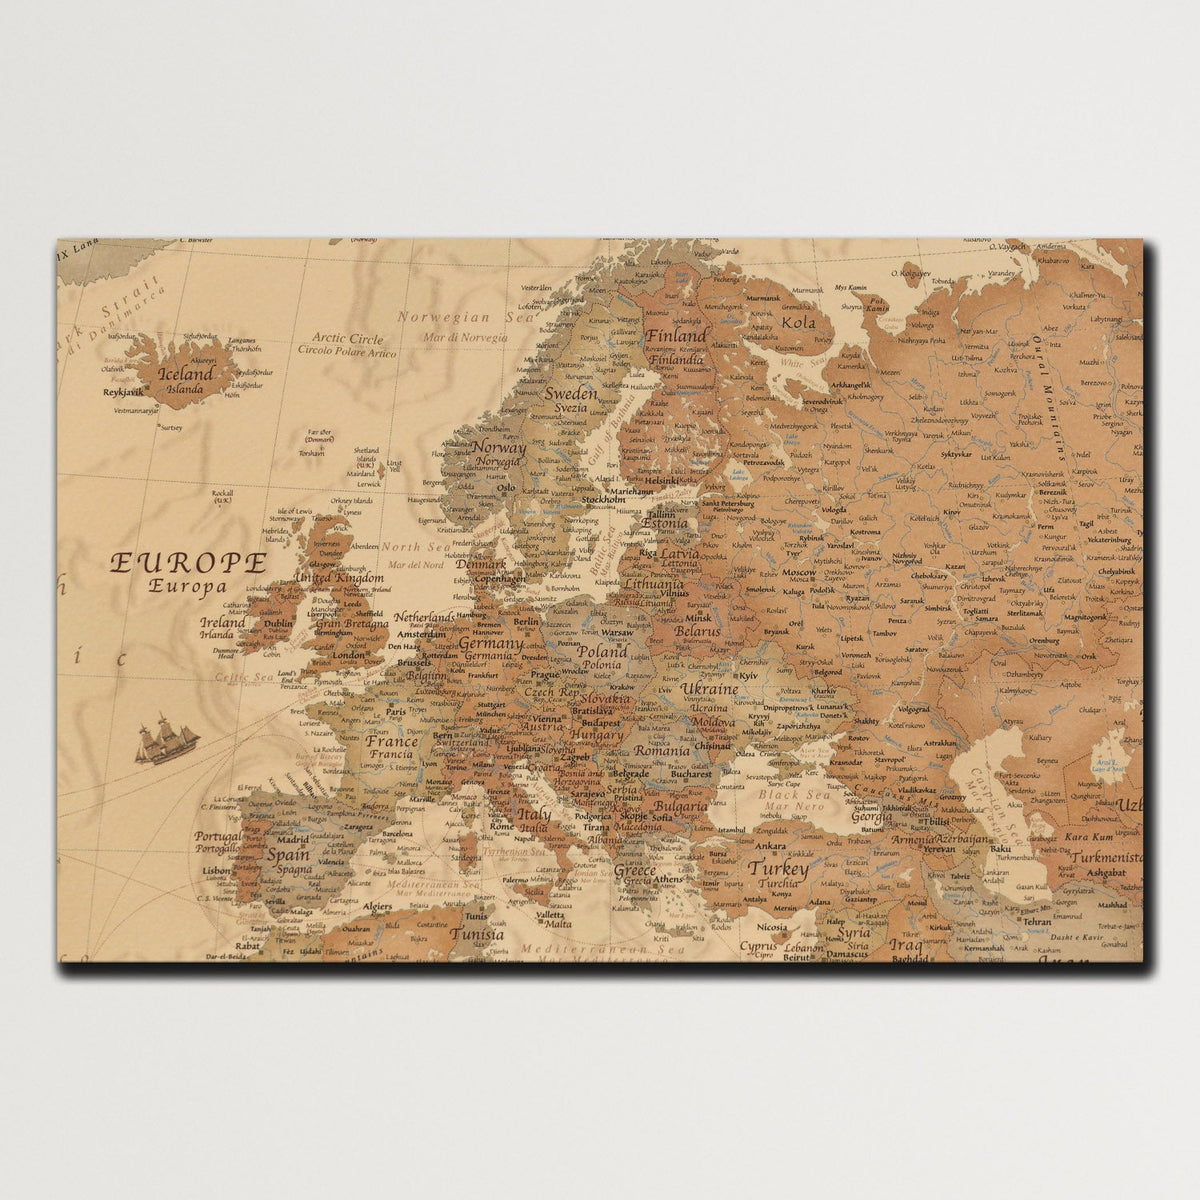 https://cdn.shopify.com/s/files/1/0387/9986/8044/products/AncientGeographicalMapofEuropeCanvasArtprintStretched-Plain.jpg